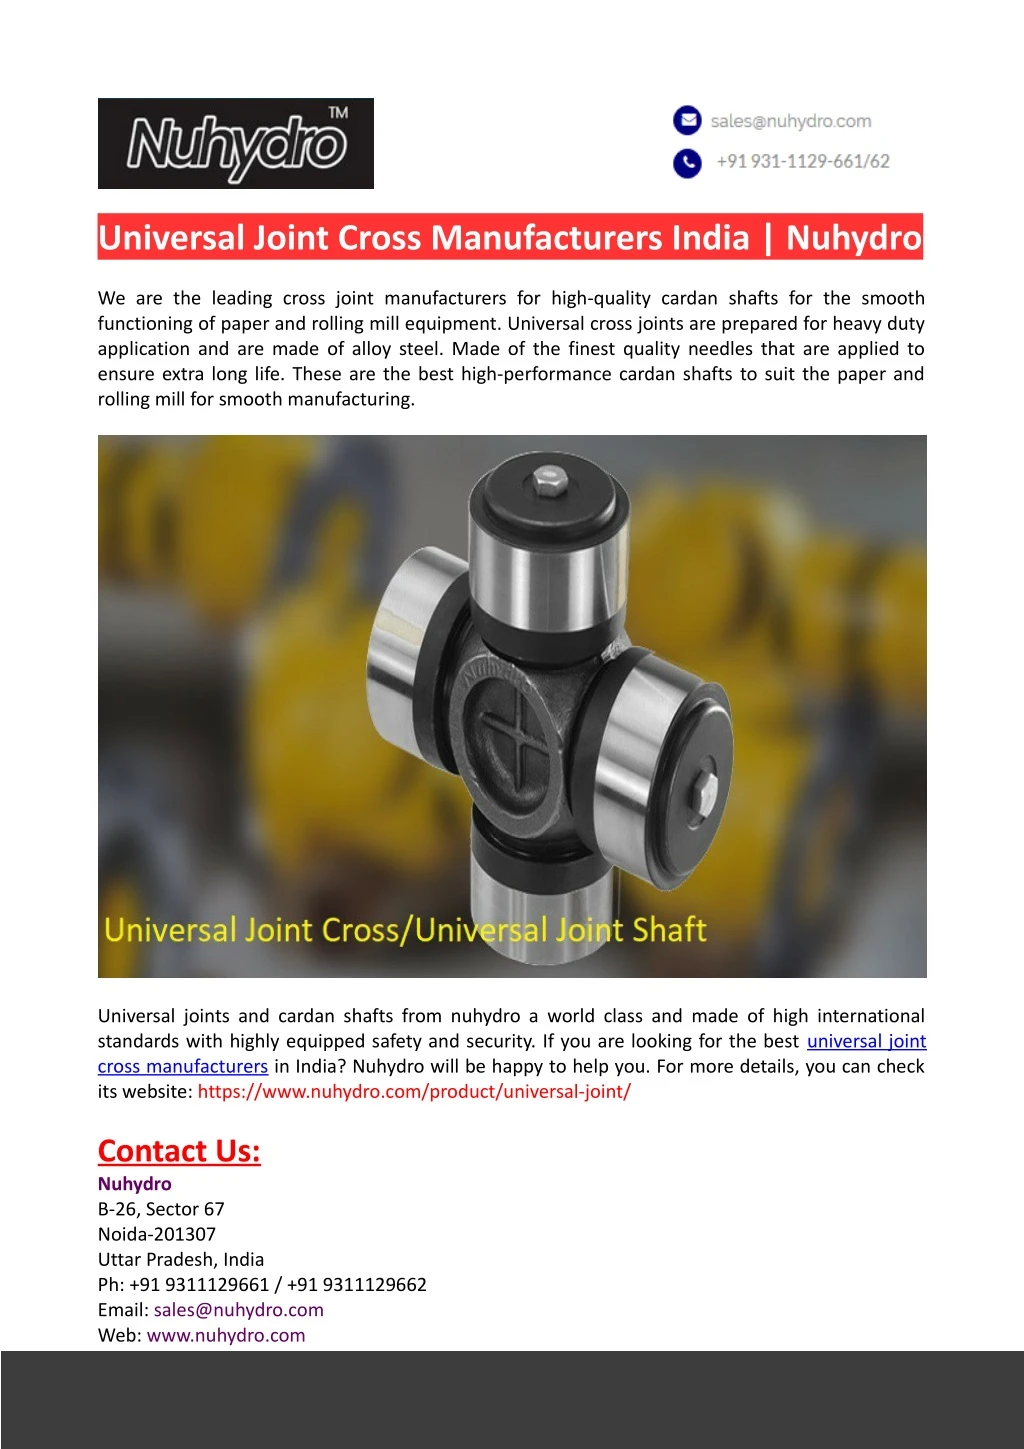 universal joint cross manufacturers india nuhydro n.